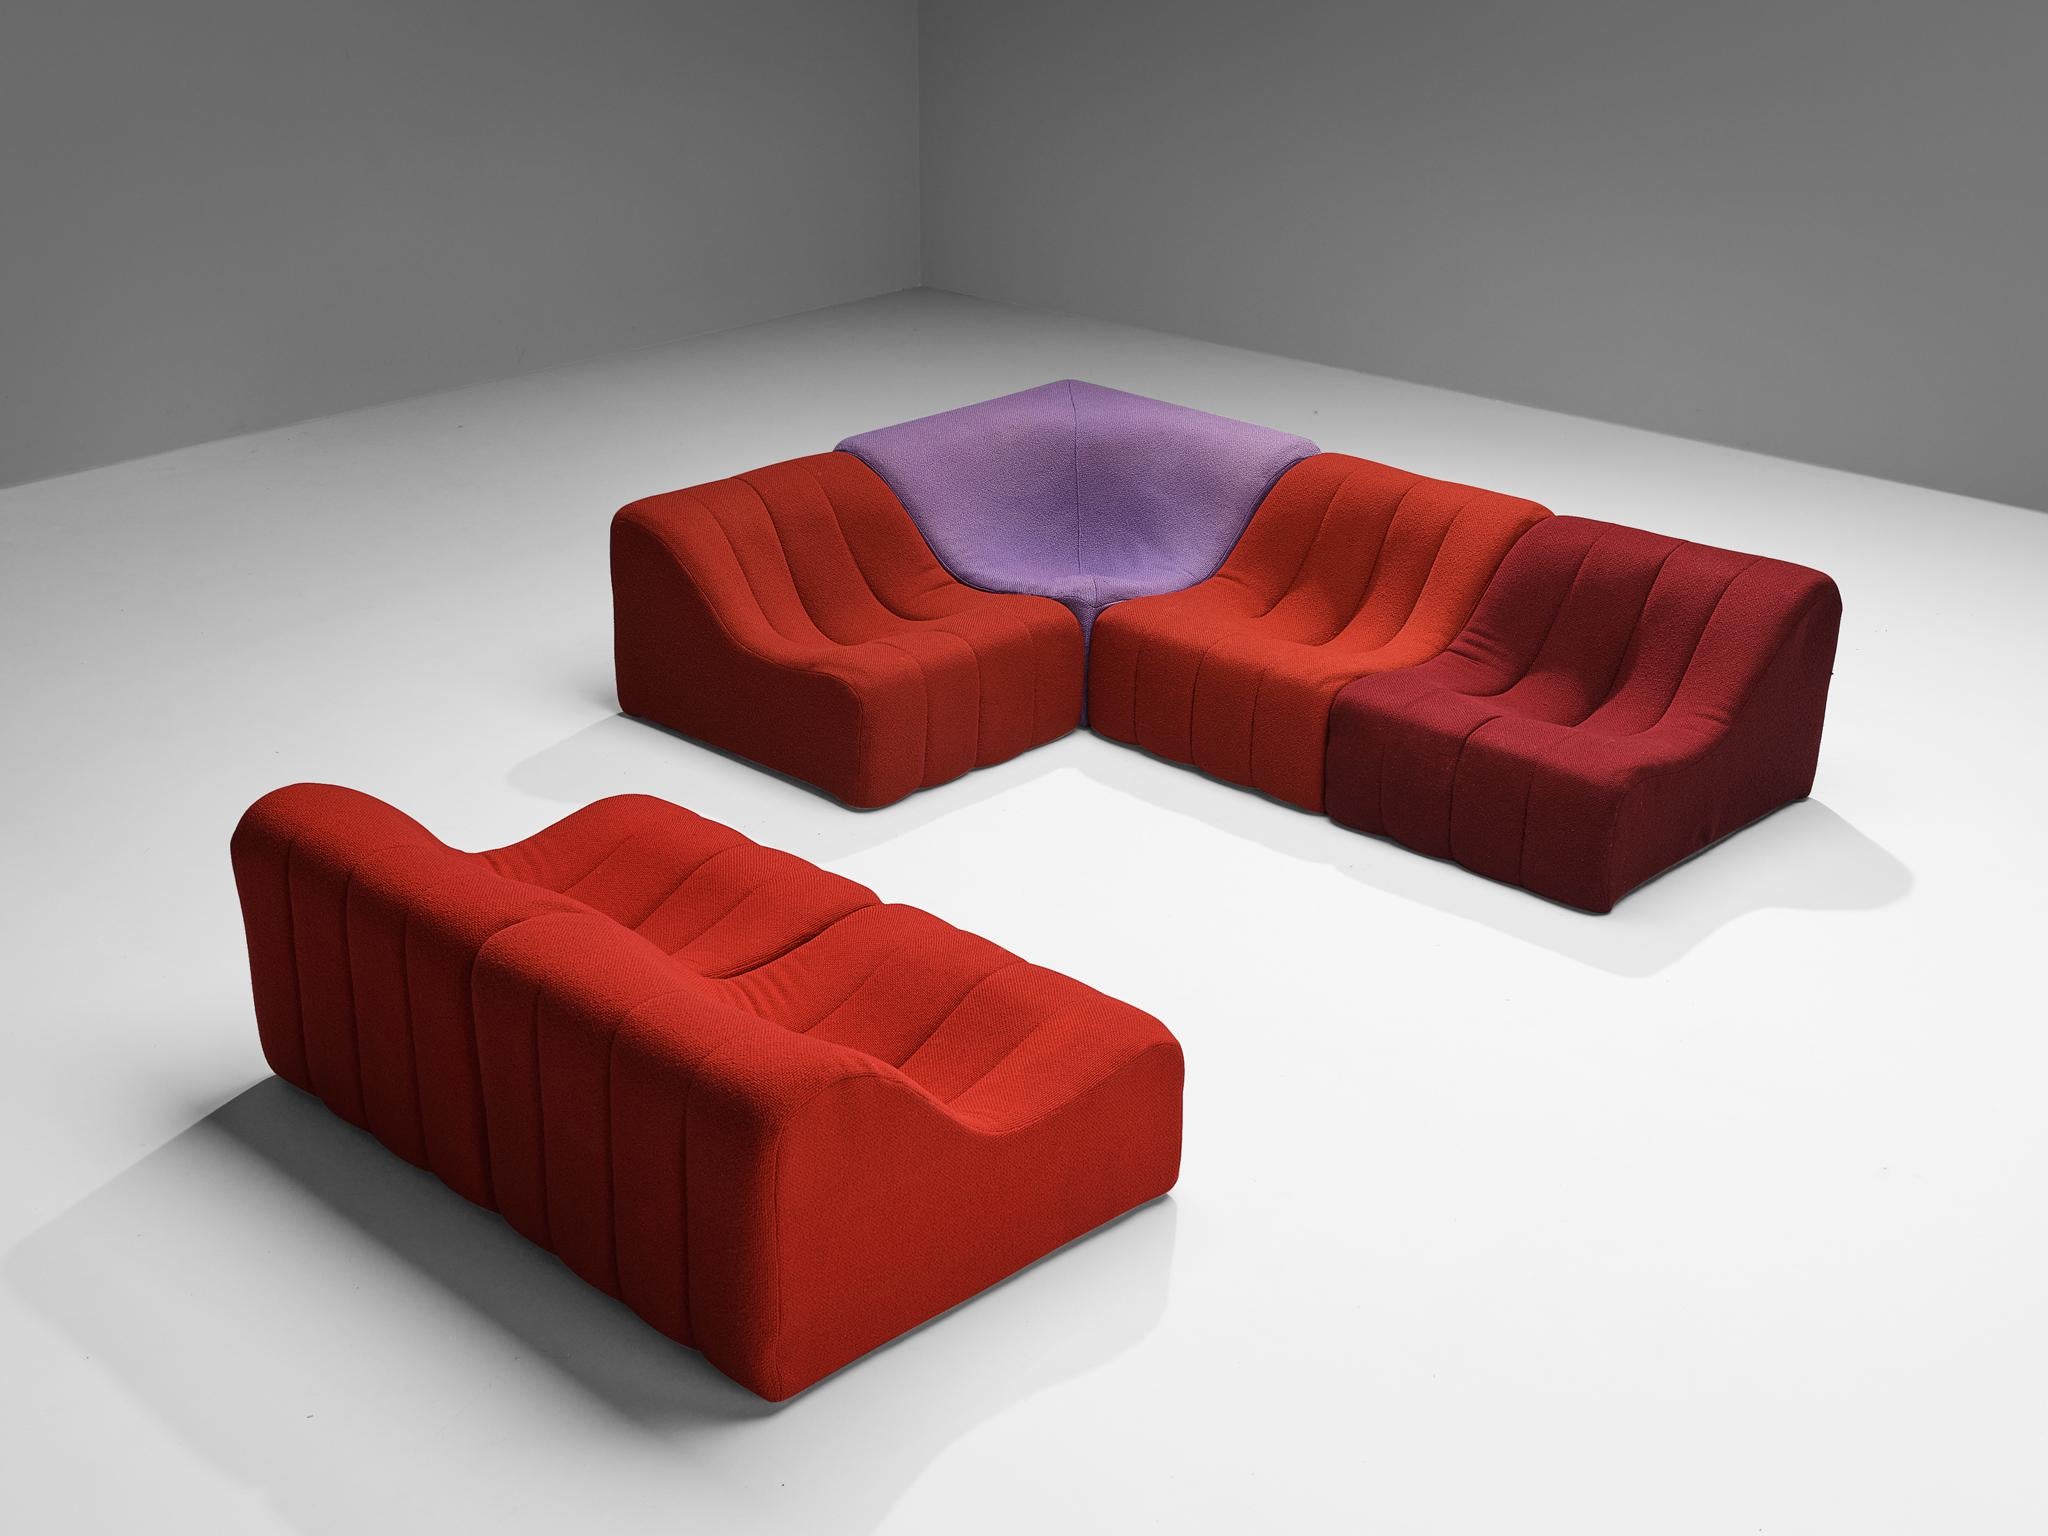 Kwok Hoi Chan for Steiner, sectional sofa, model ´chromatic´, fabric, France, 1970

A postmodern design by Kwok Hoi Chan created in 1970 for Steiner. Design in the seventies was all about going beyond the strict conventions of modernism, with the